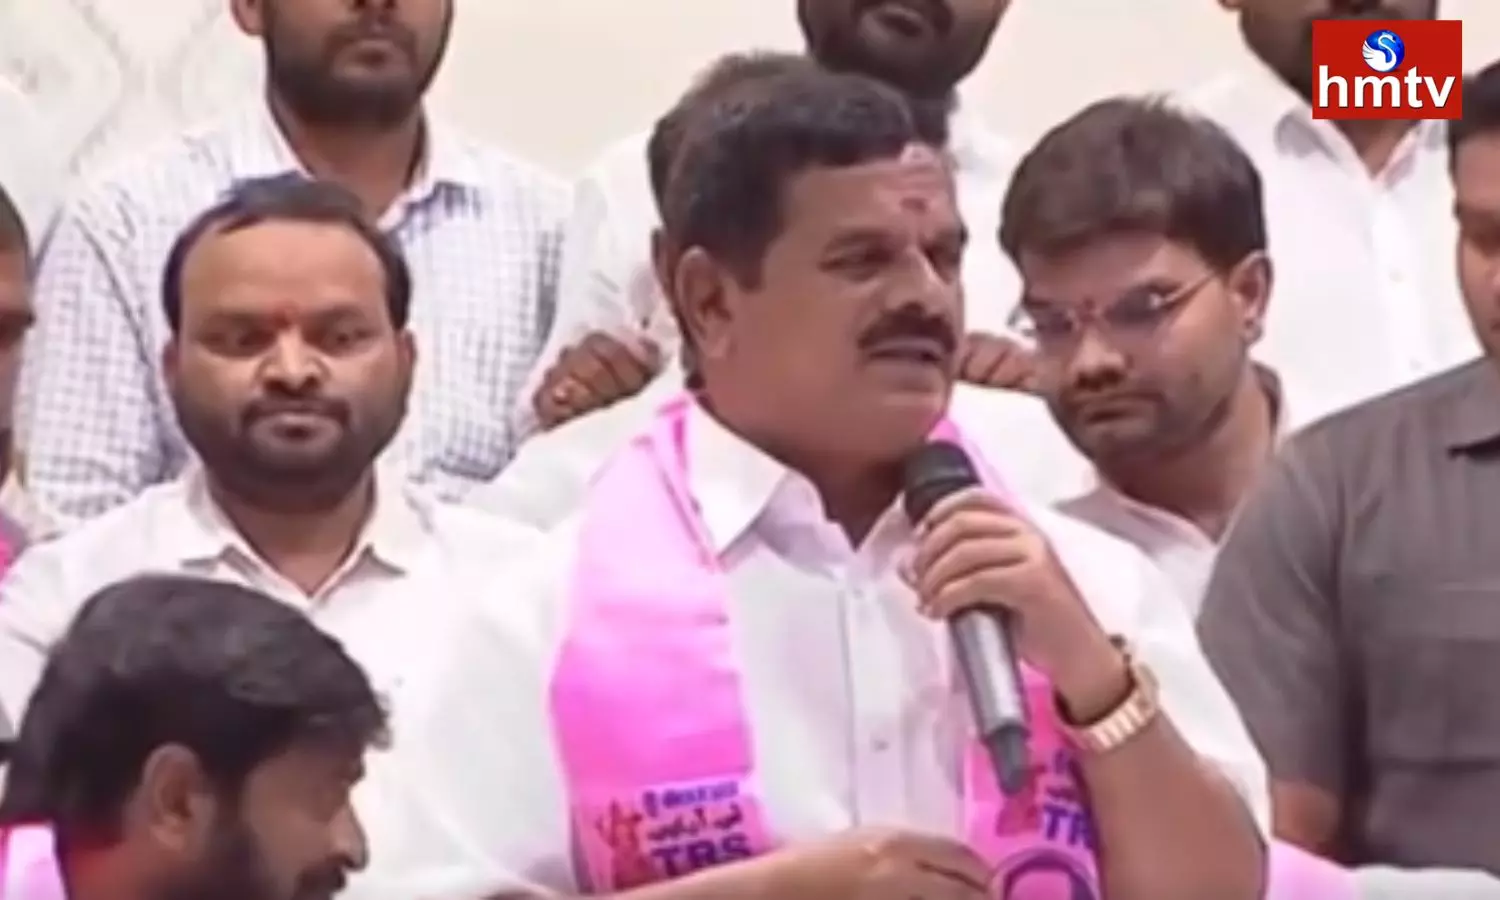 Swamy Goud said that he is happy to join TRS